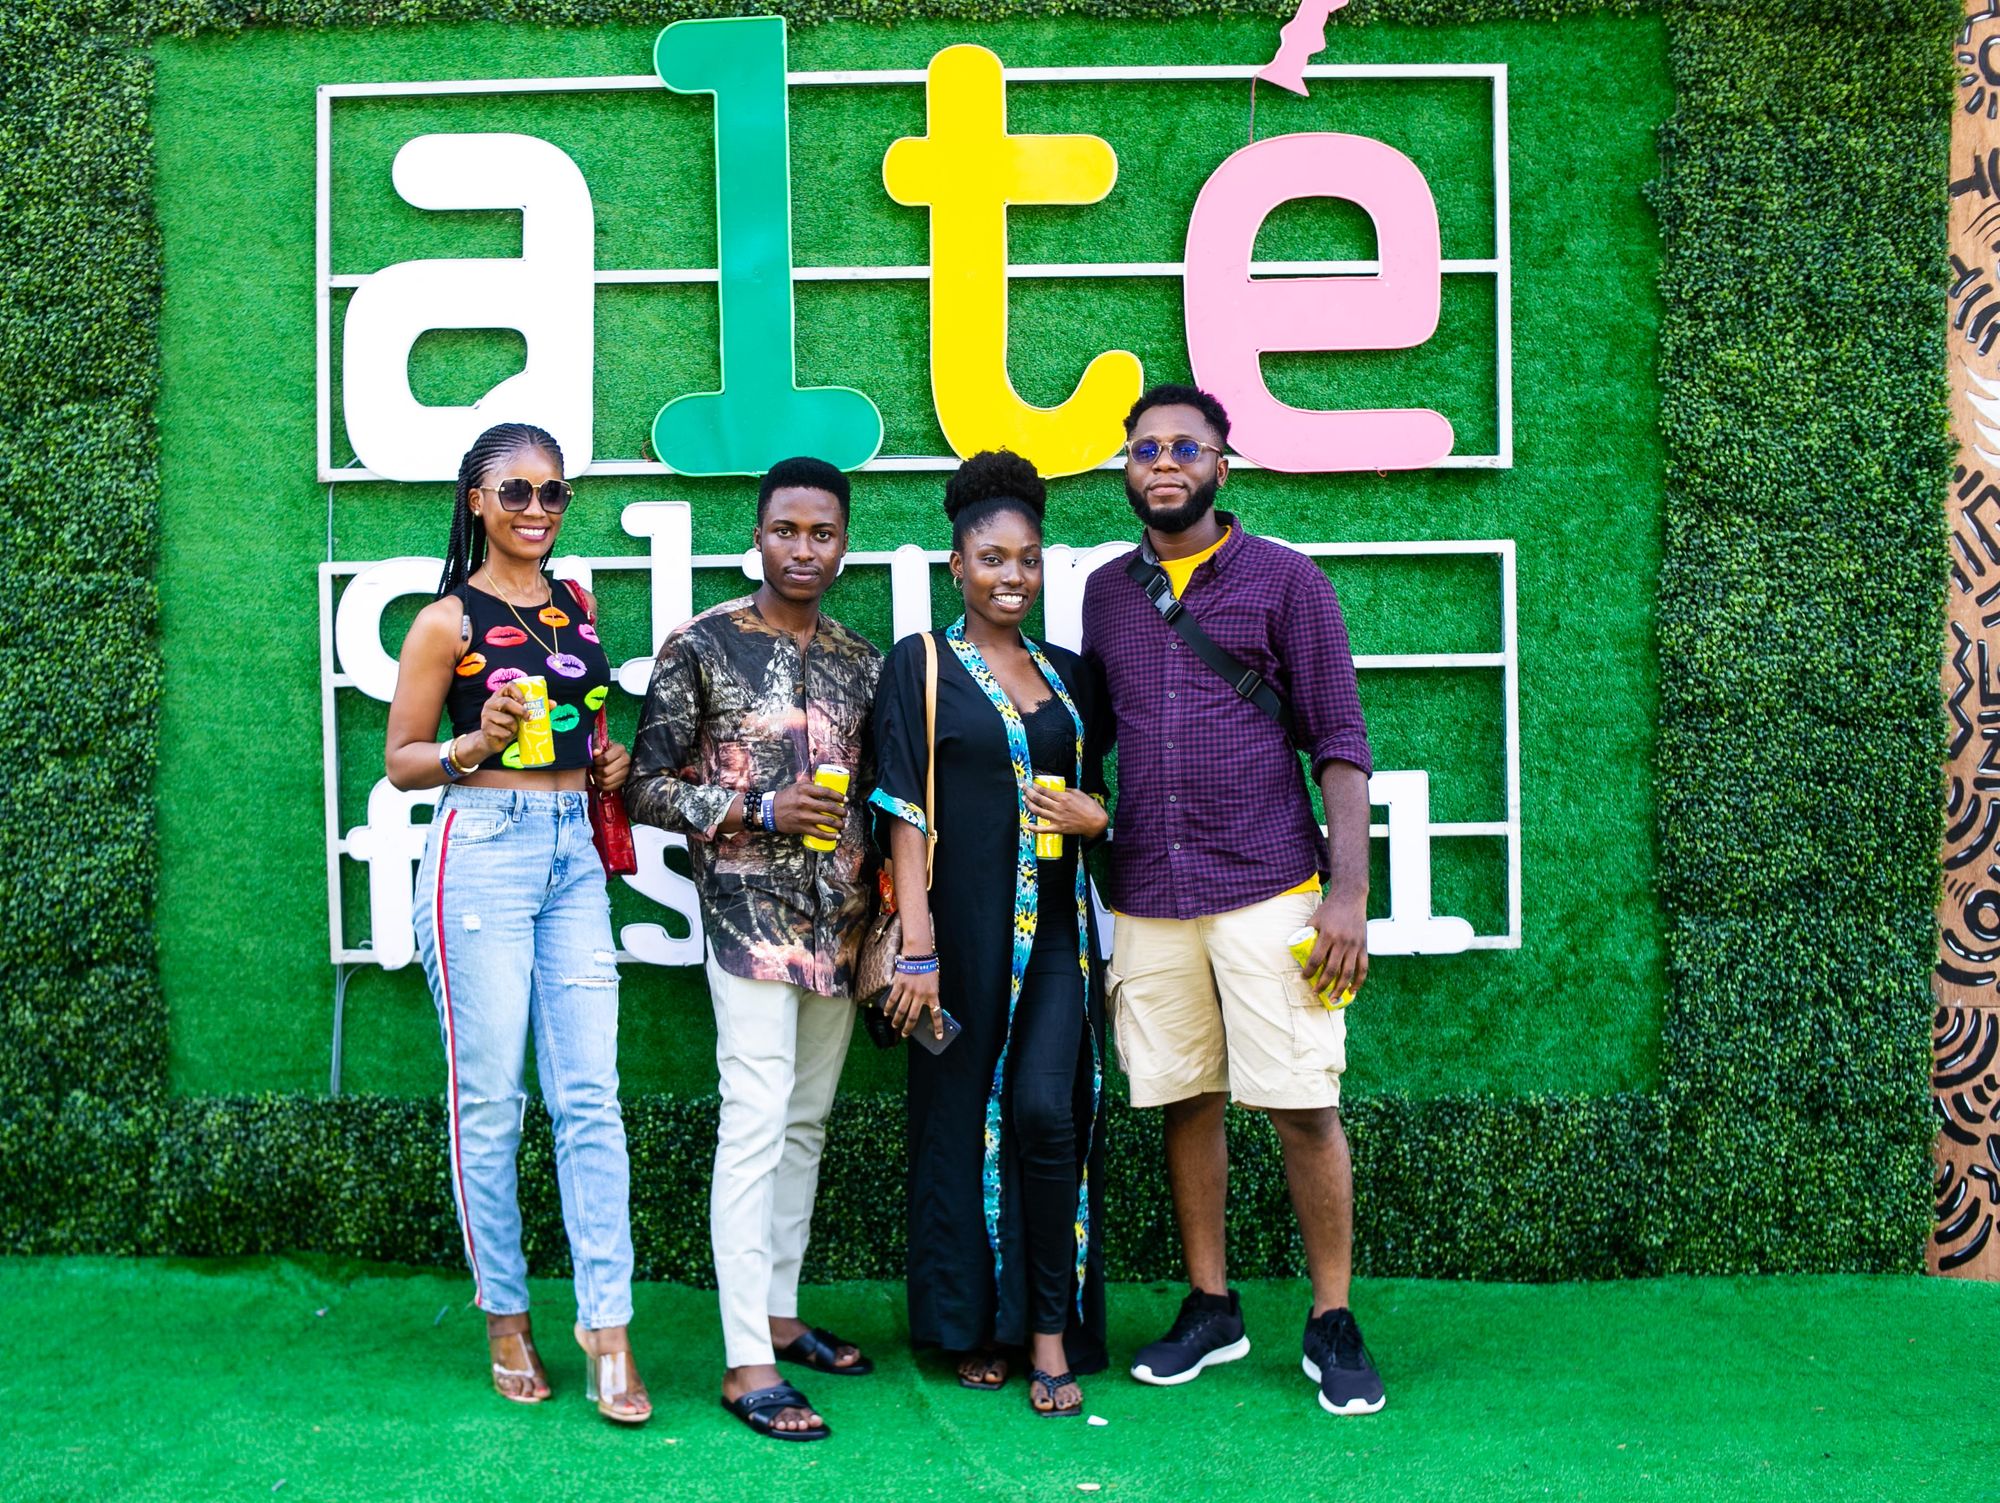 Two women and two men posing for pictures behind the Alté Culture Festival logo